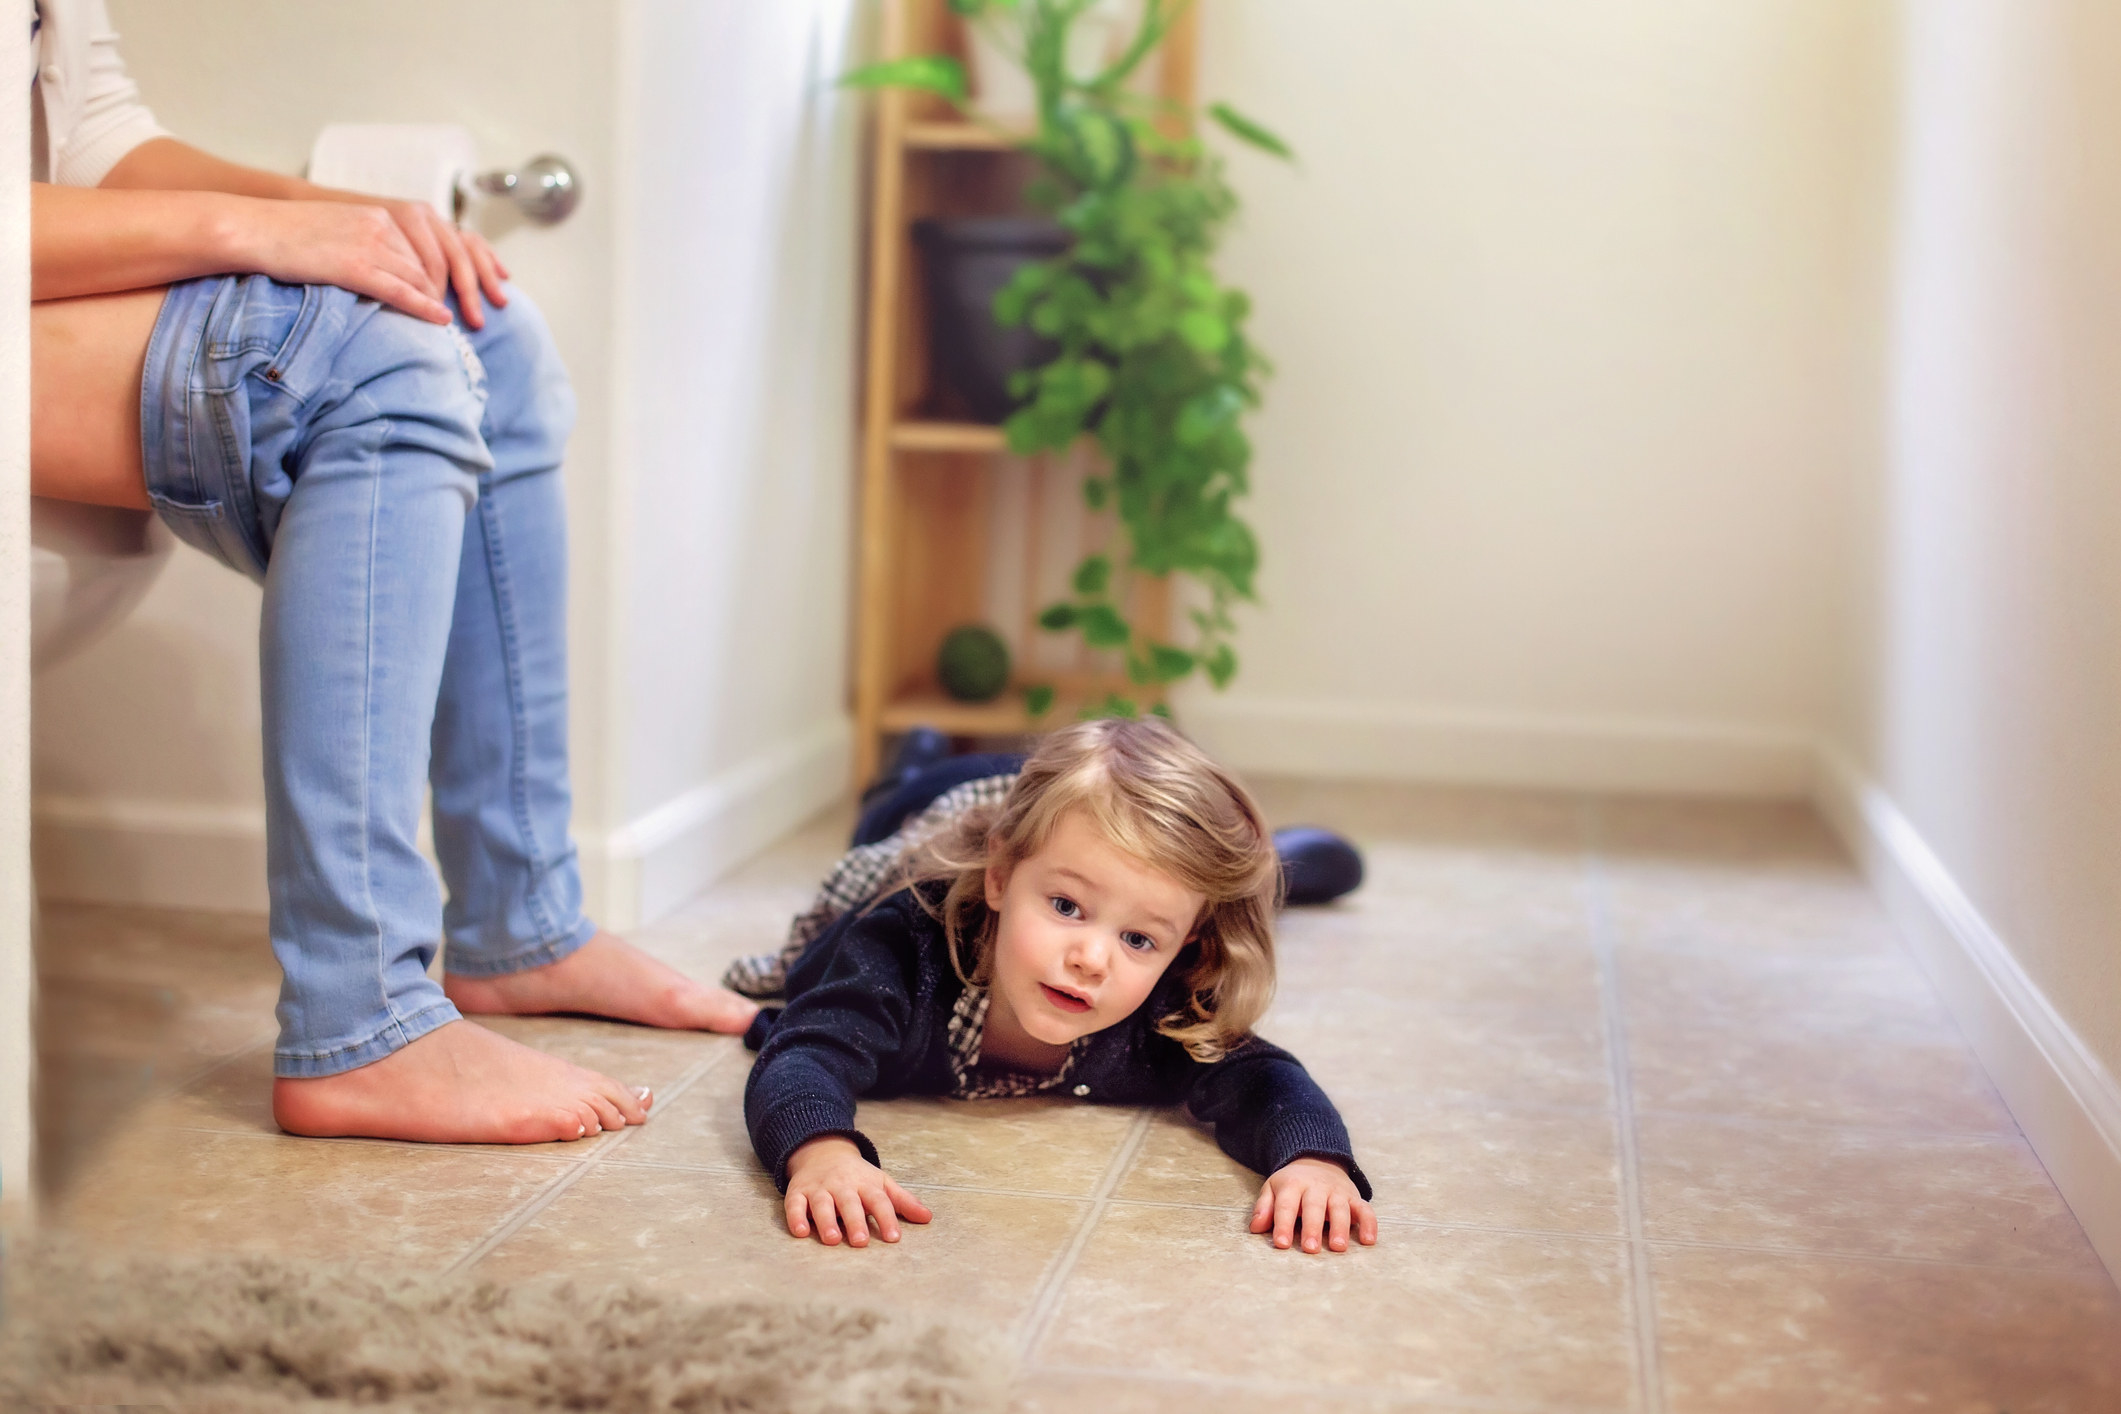 toddler on the bathroom floor with the parent uses the toilet